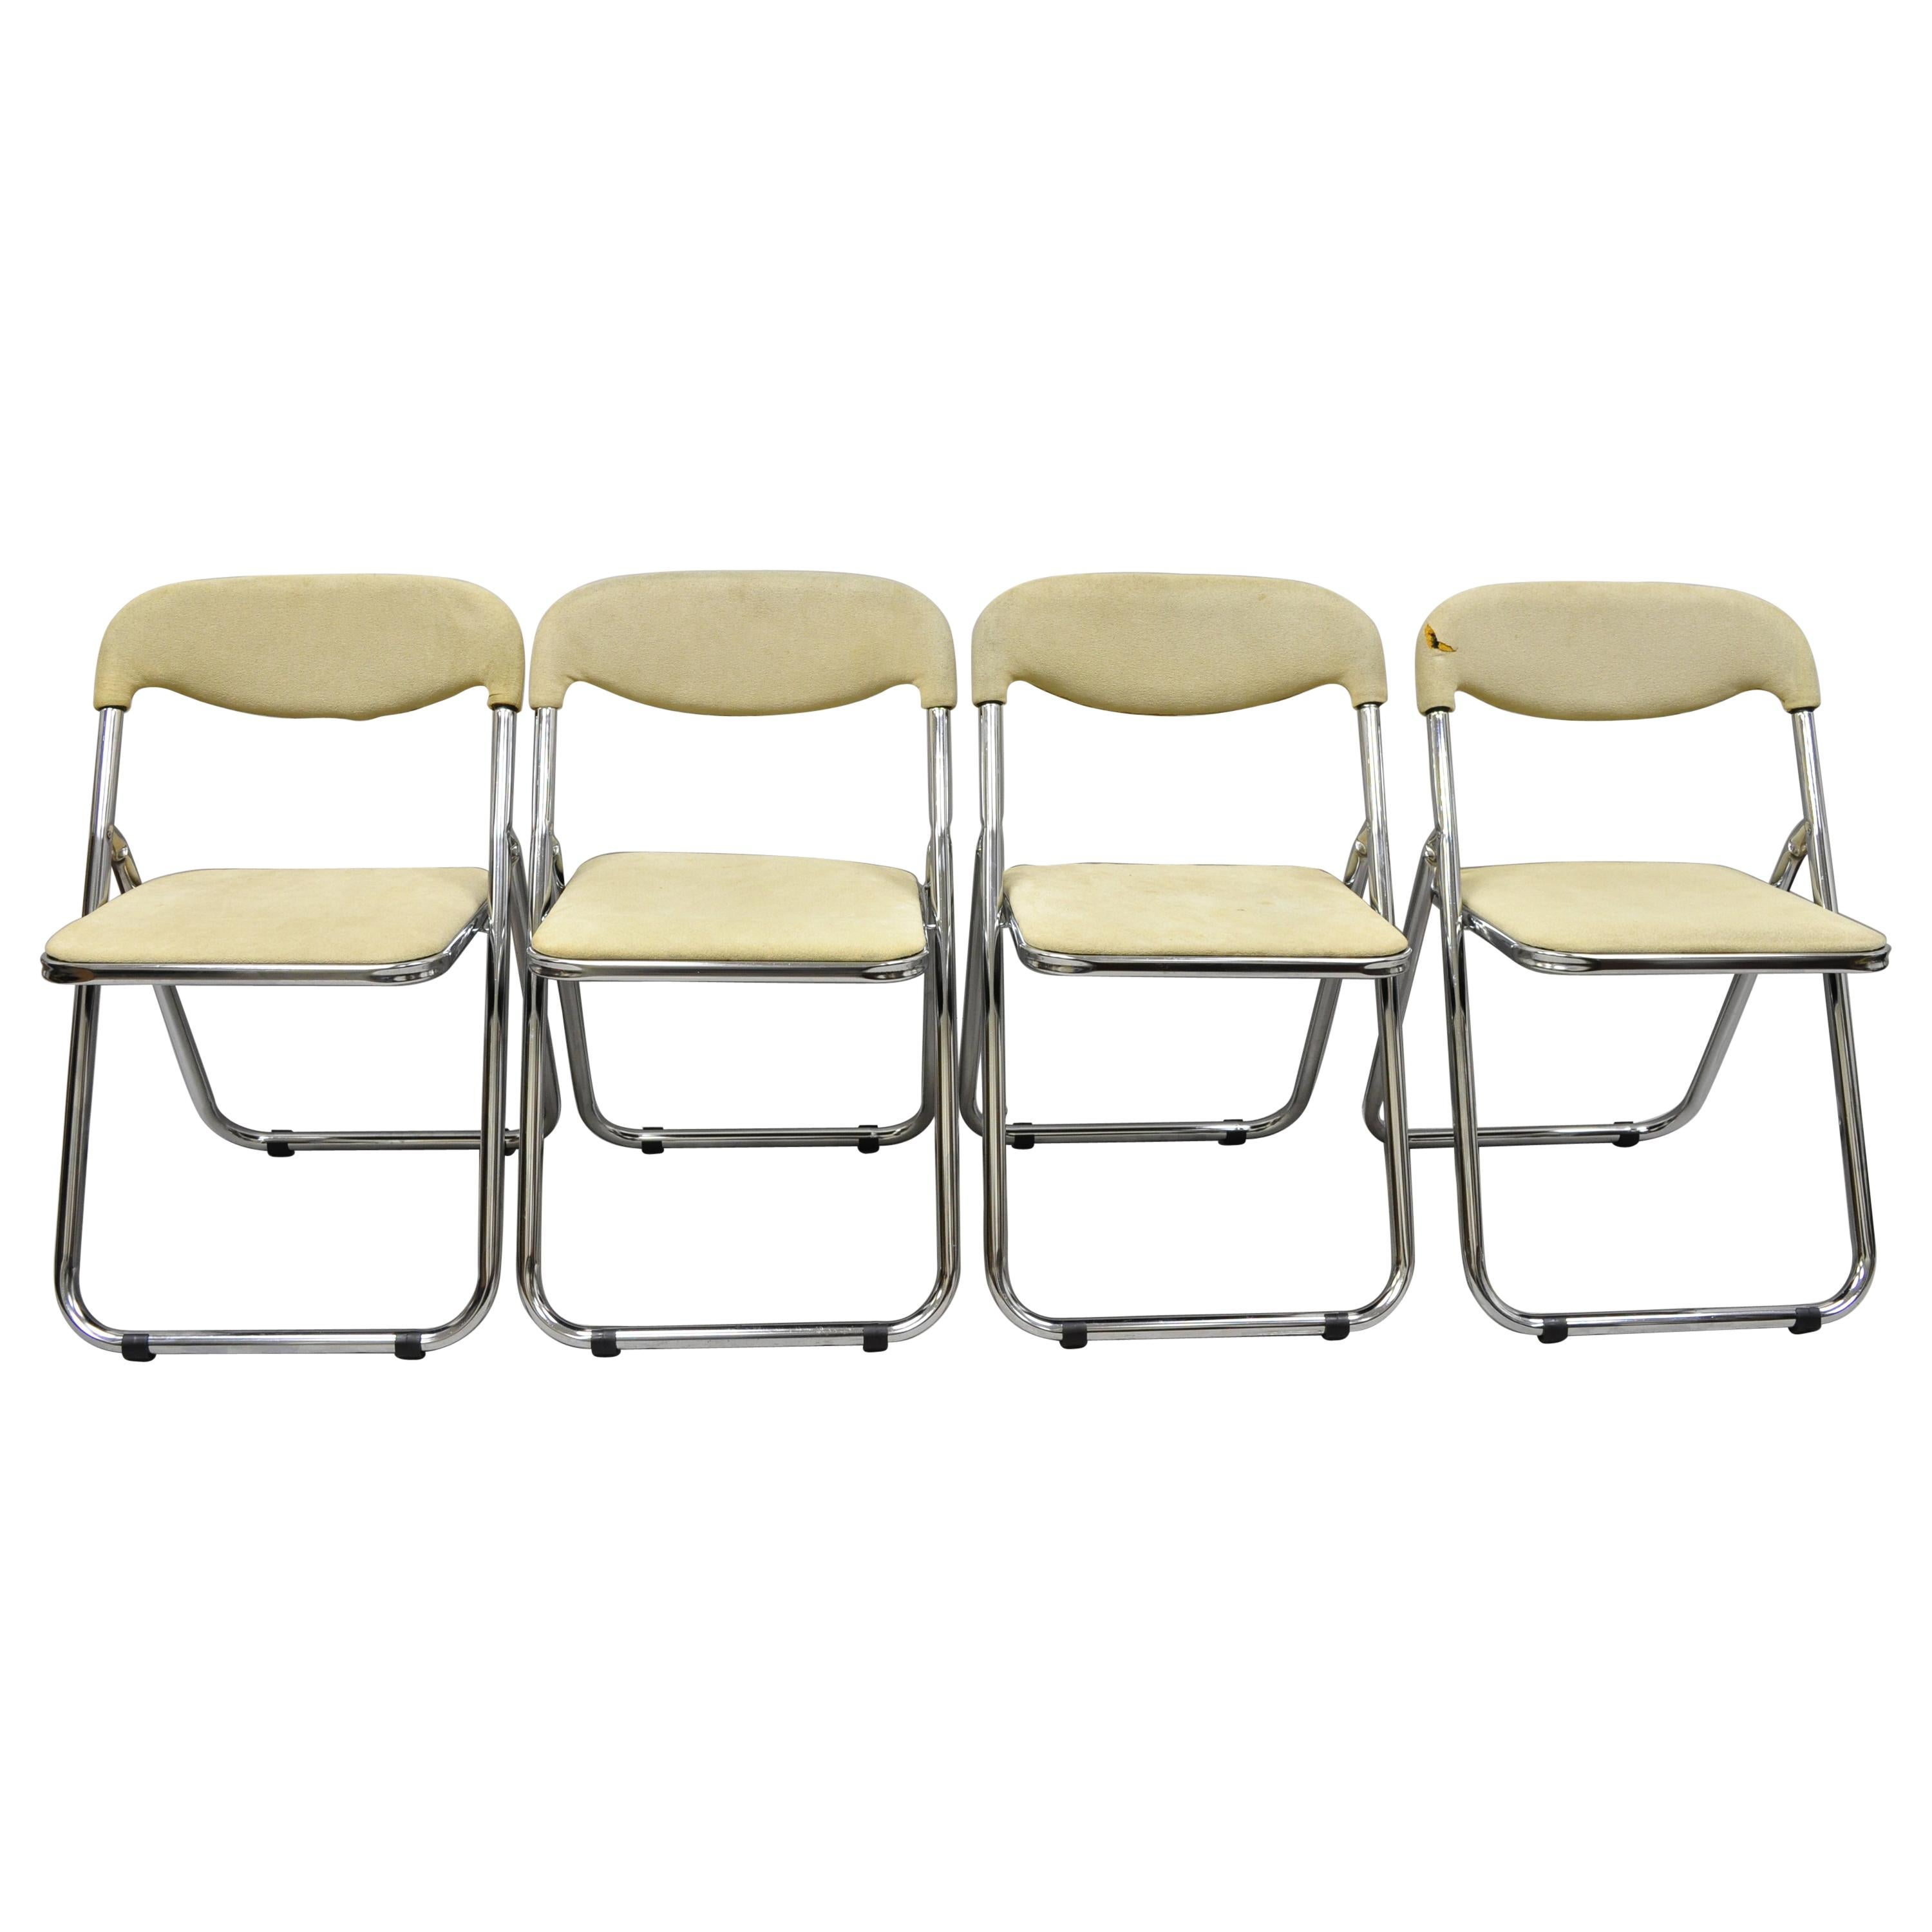 Vintage Italian Midcentury Chrome Upholstered Folding Game Chairs, Set of 4 For Sale